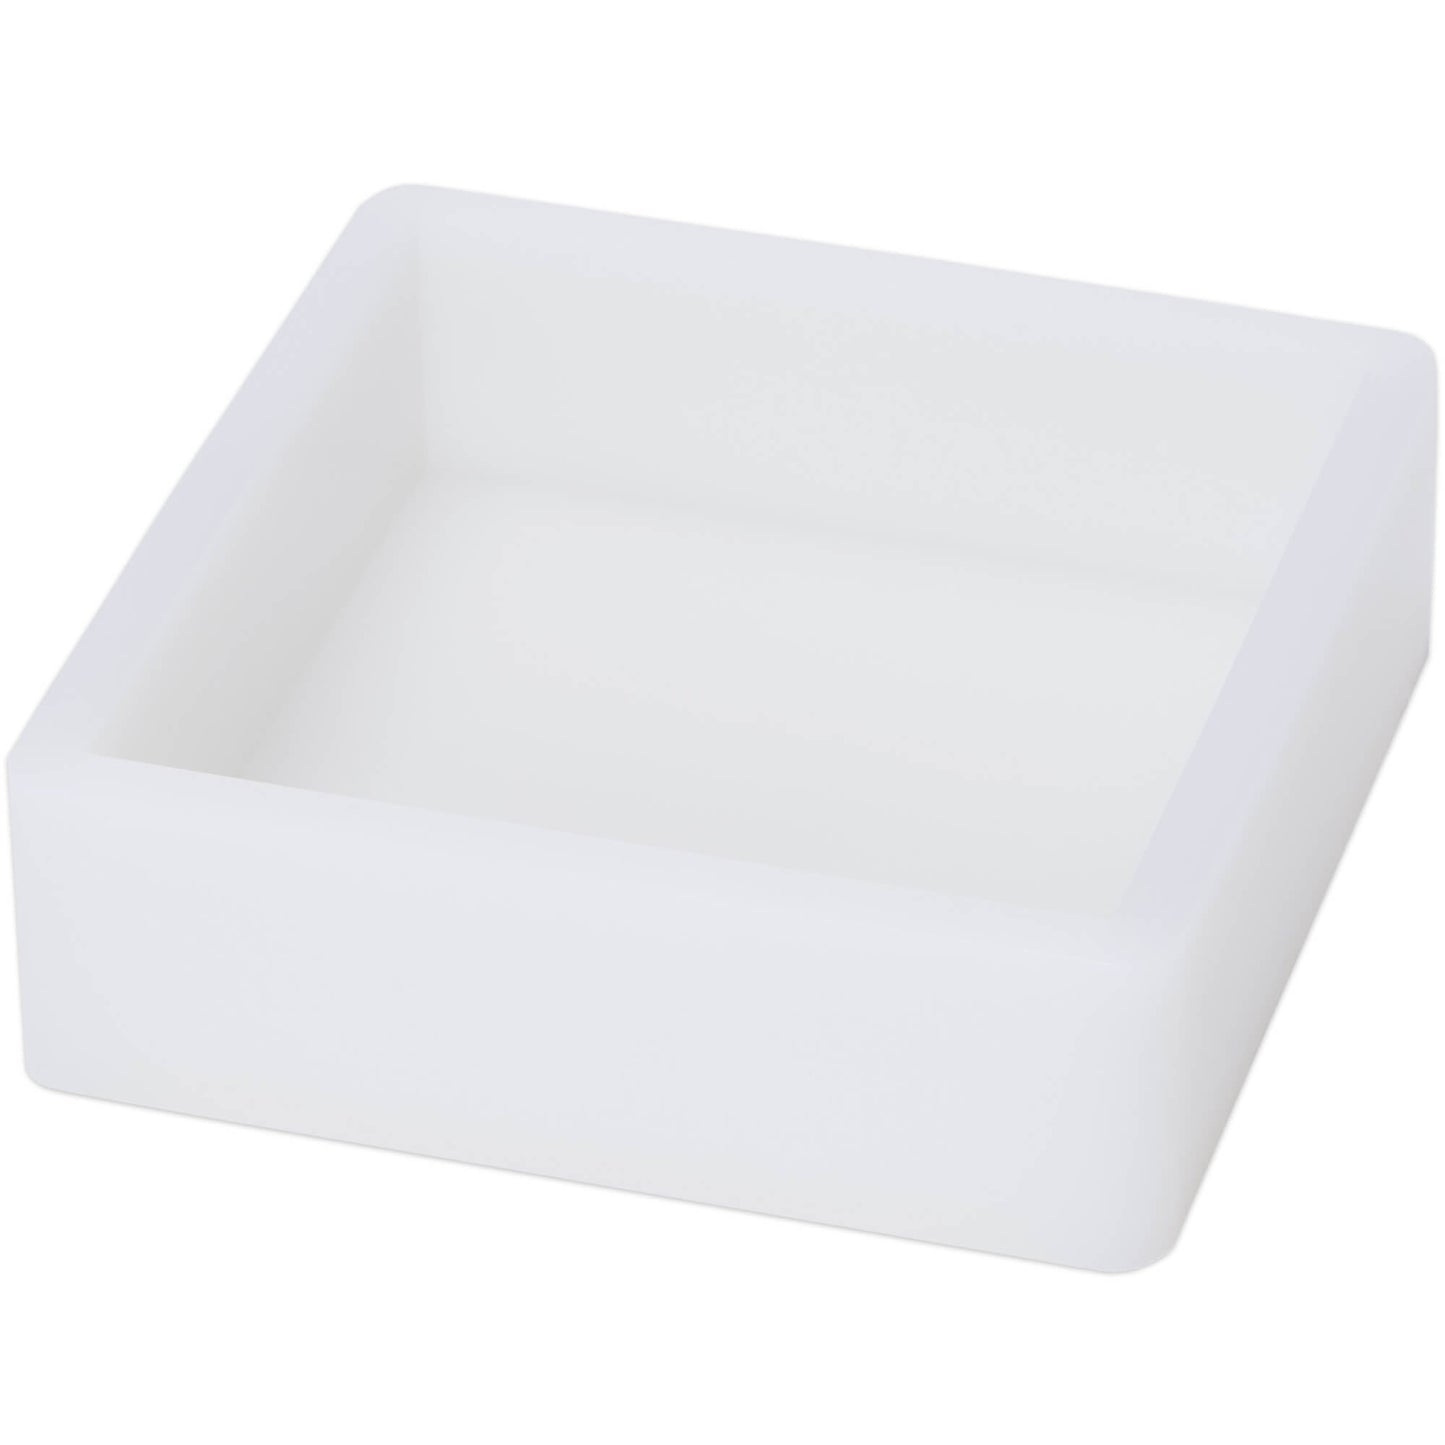 Large Silicone Square Mold for Resin